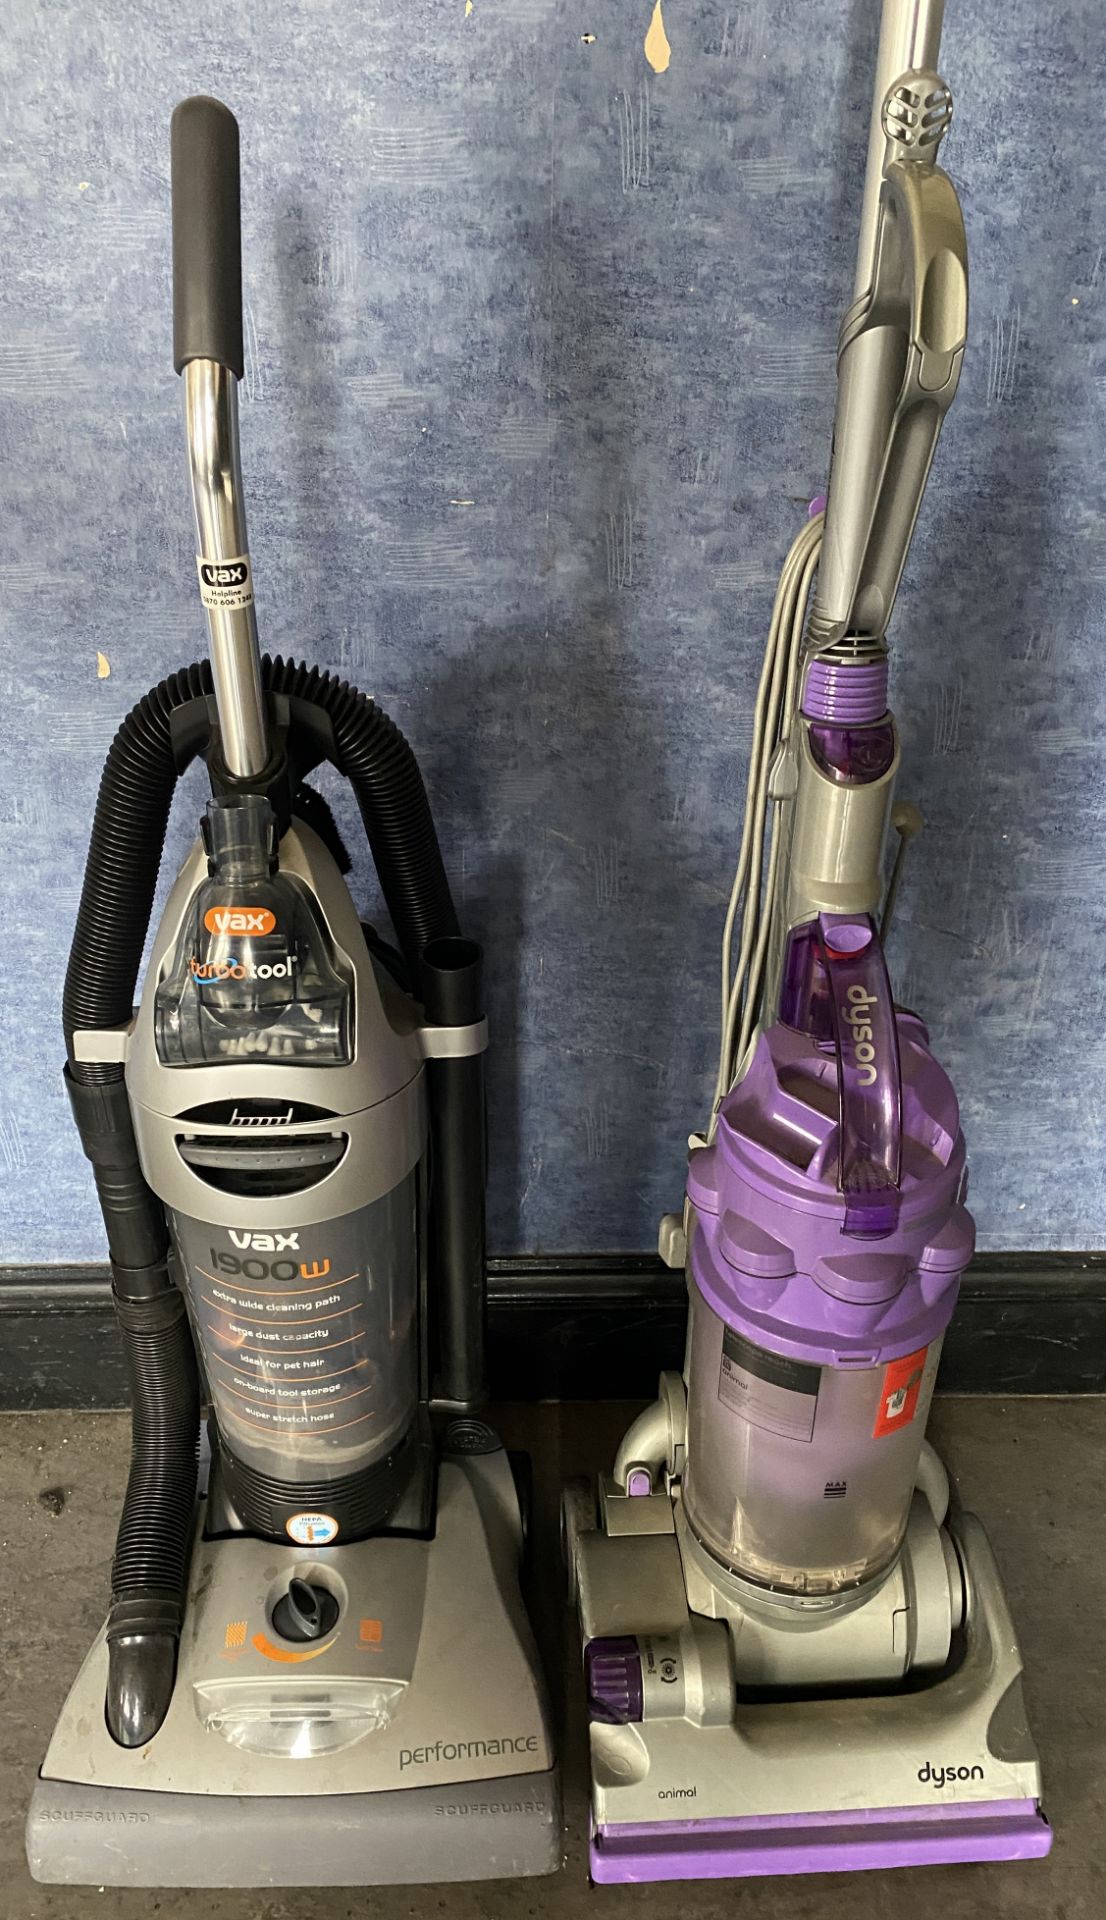 2 x Upright vacuum cleaners - Vax 1900w Turbo Tool Performance and a Dyson Animal (Not PAT tested).